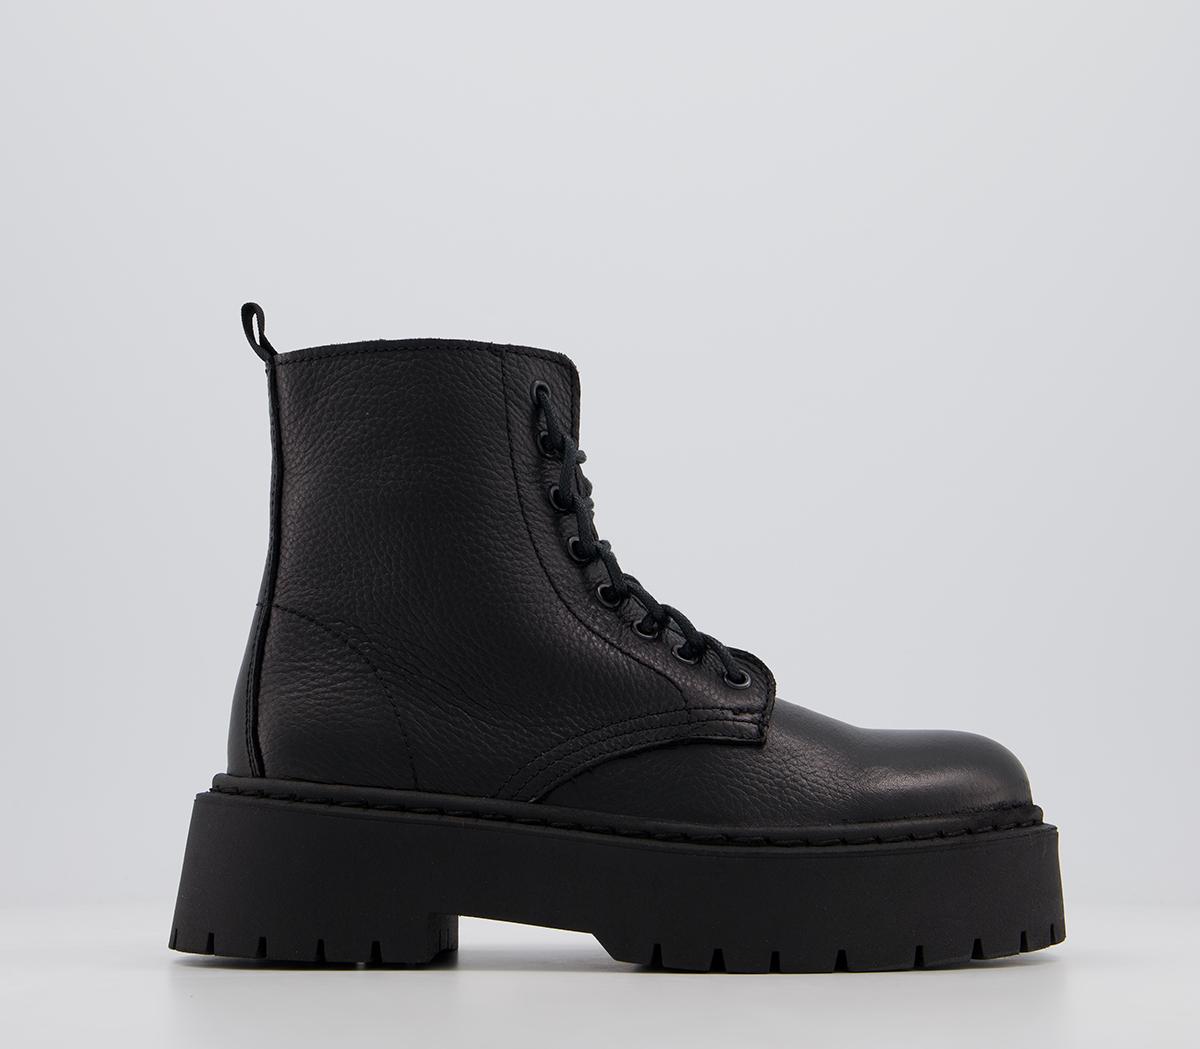 OFFICEAccord Lace Up Ankle BootsBlack Leather